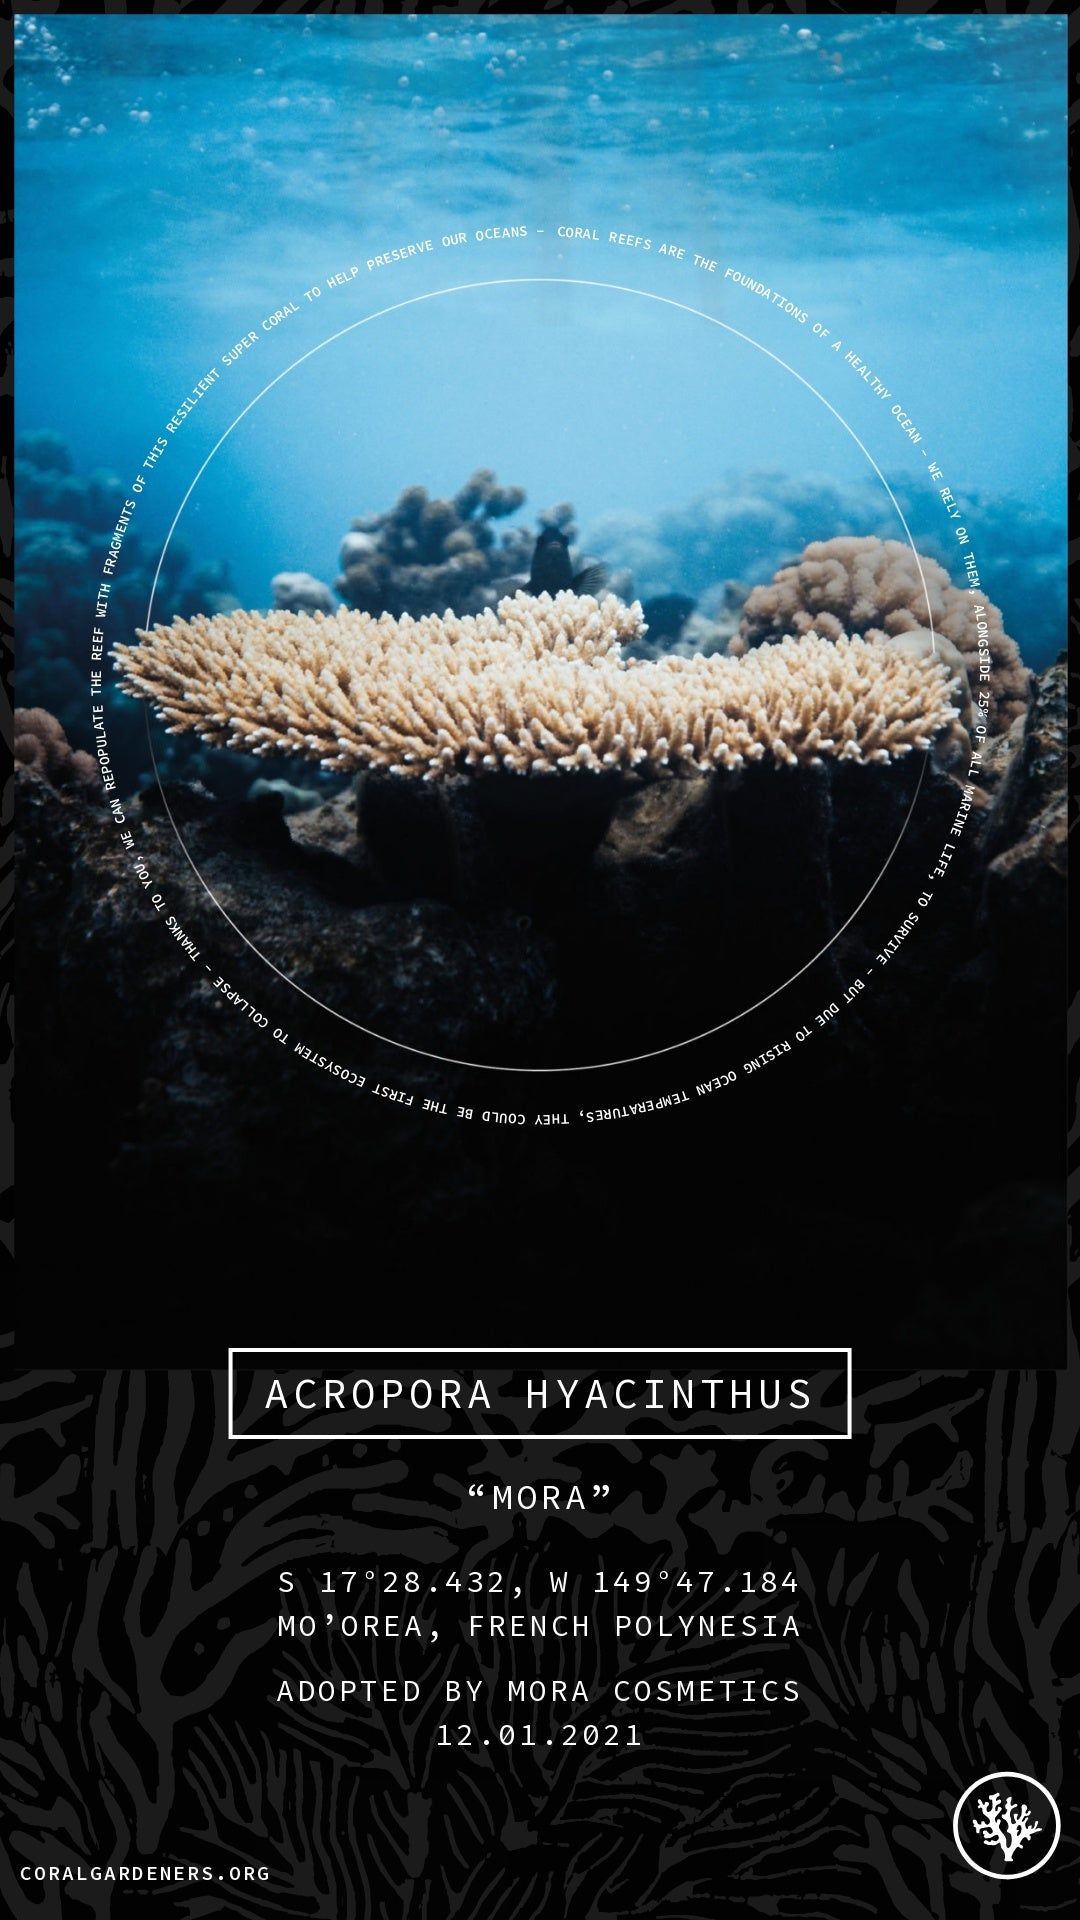 ACROPORA HYACINTHUS - Mora Cosmetic's Adopted Coral